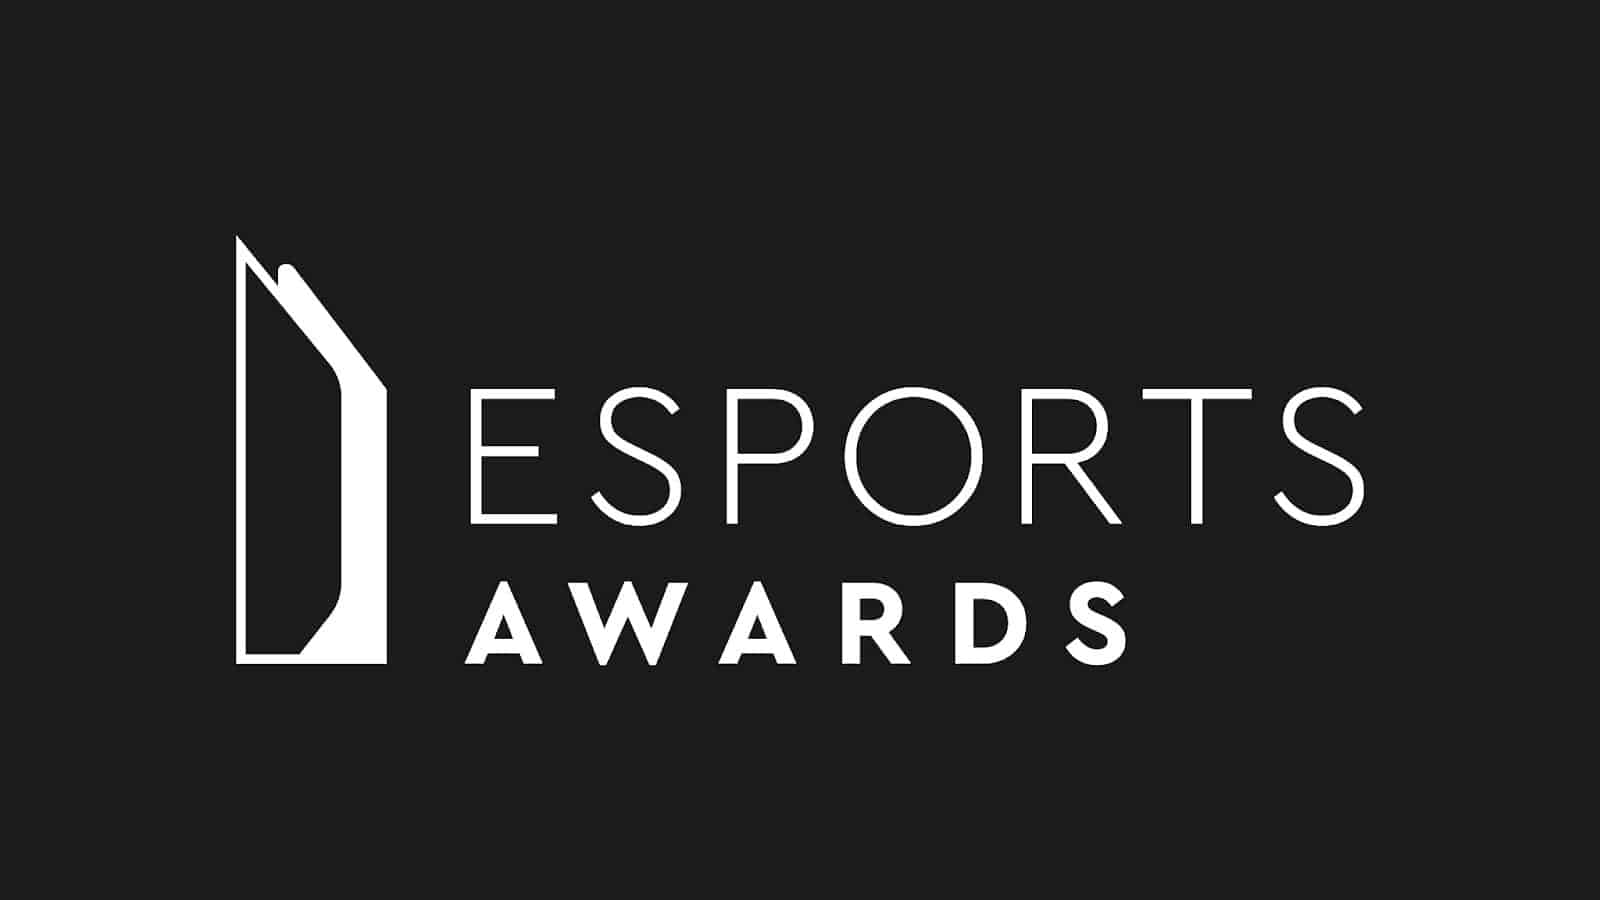 Esports Awards logo and title in white text across a black background